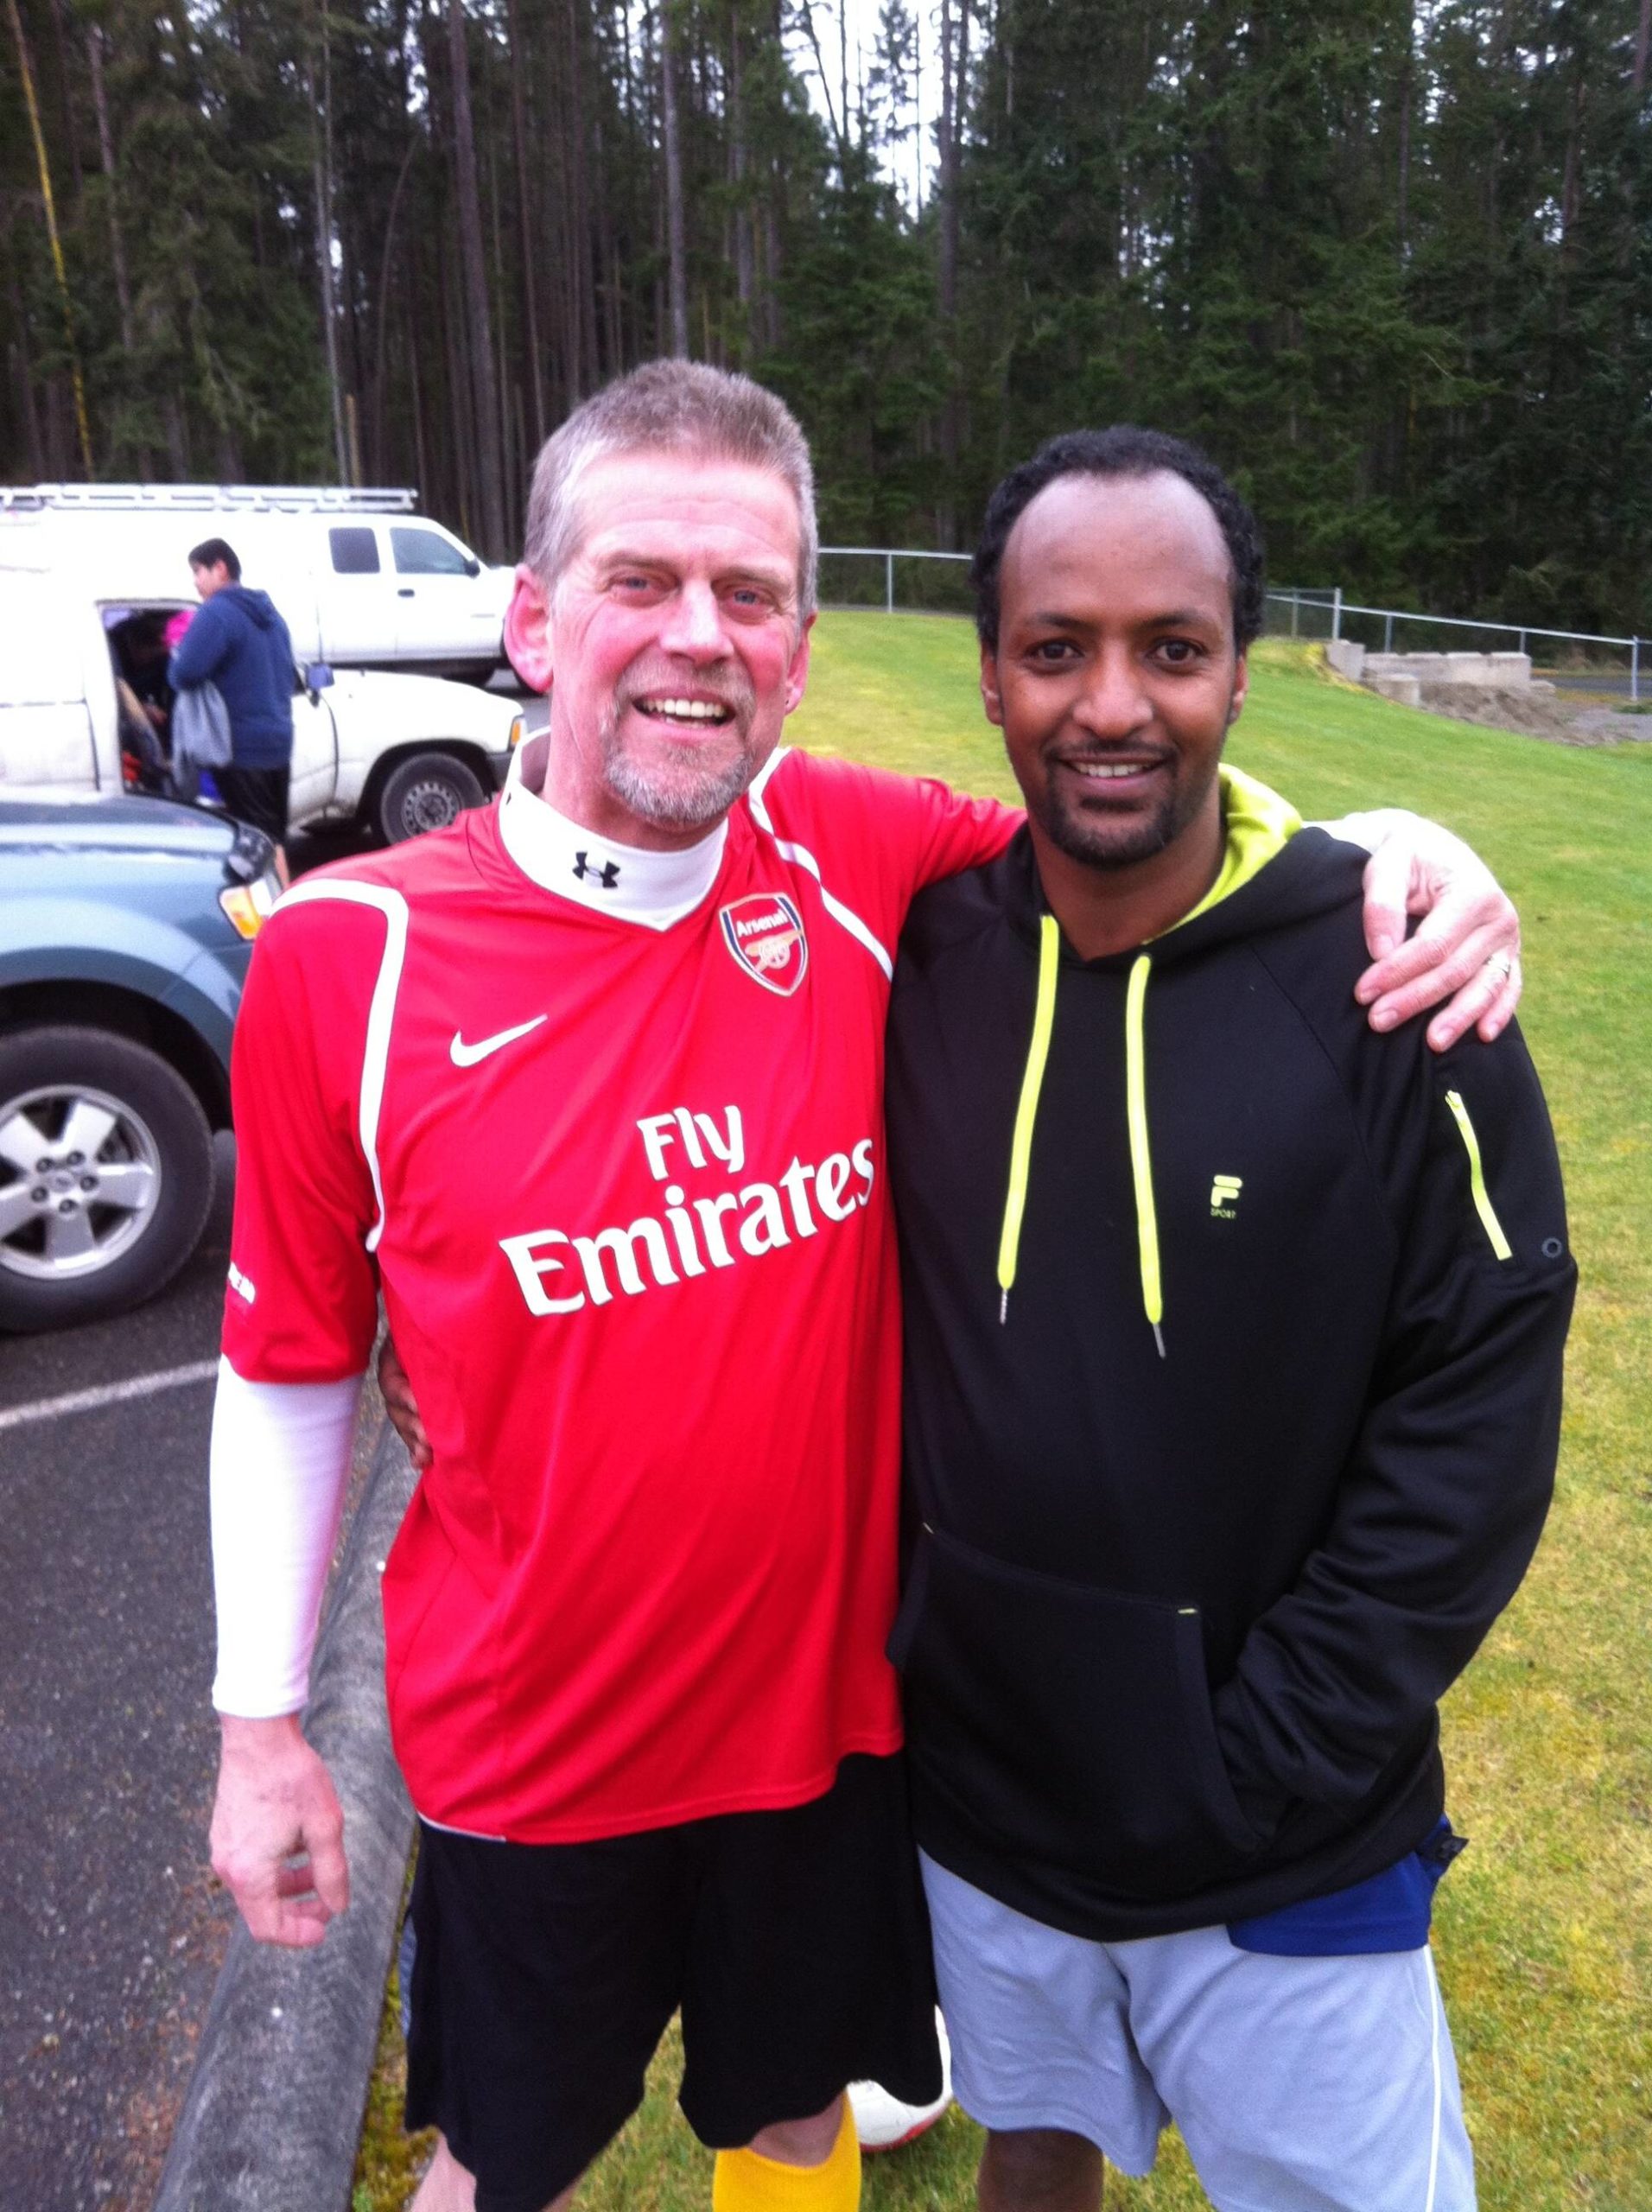 Photo provided
Mark Helpenstell, left, plays on the “men over 40” team in the Snohomish County Adult Soccer Association with Sarawit Hailu, one of the first players he coached at South Whidbey High School.